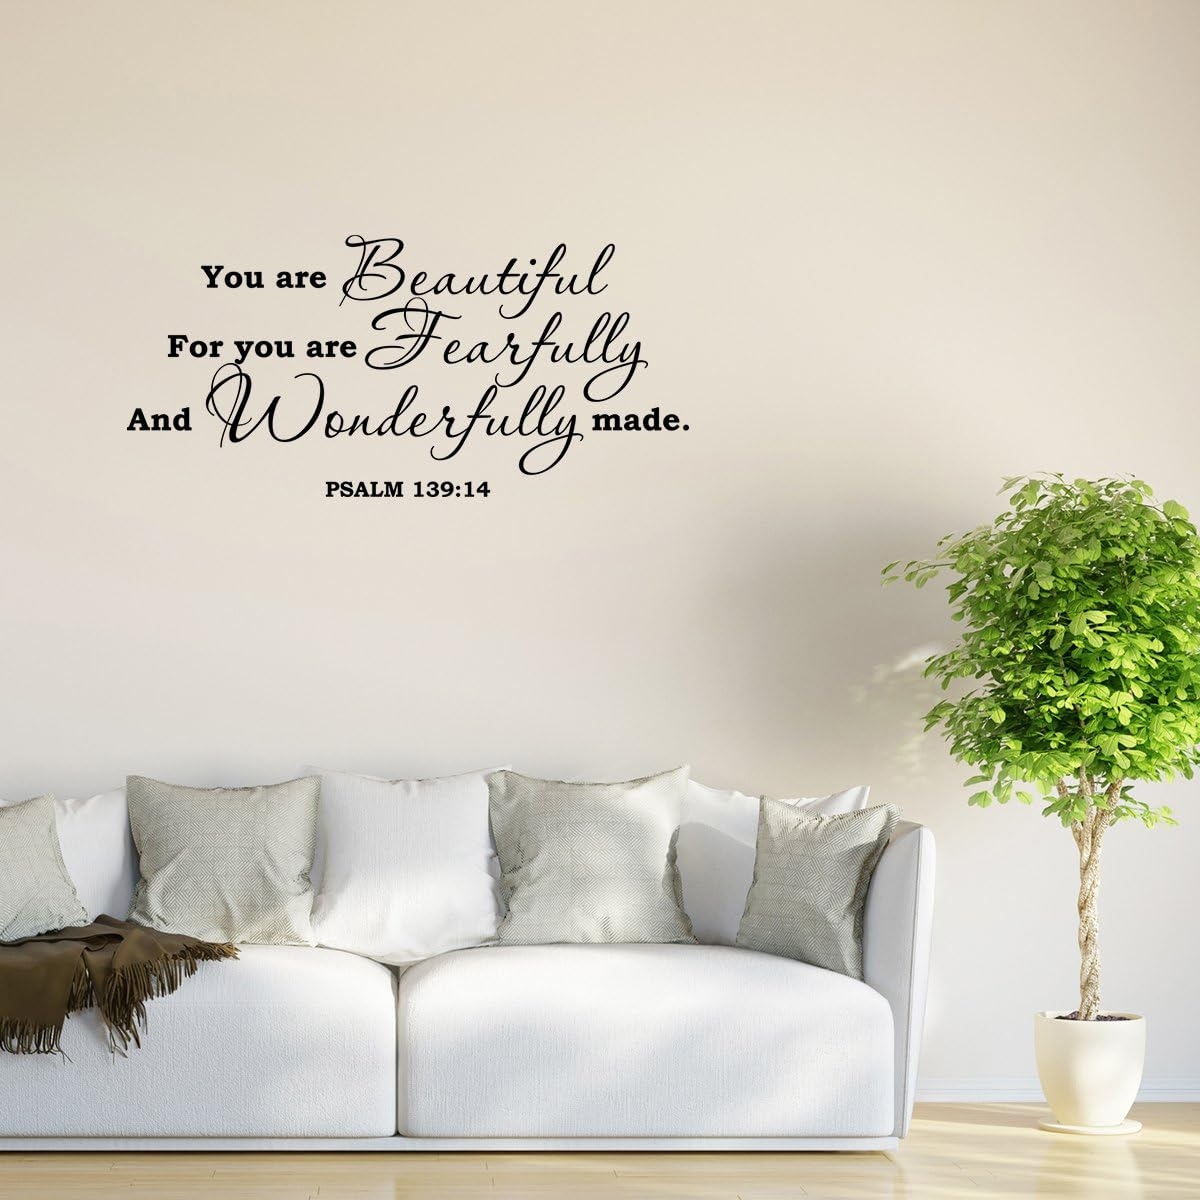 Wall Decal Quote Psalm 139:14 You are Beautiful Bible Verse Scripture Wall Decal